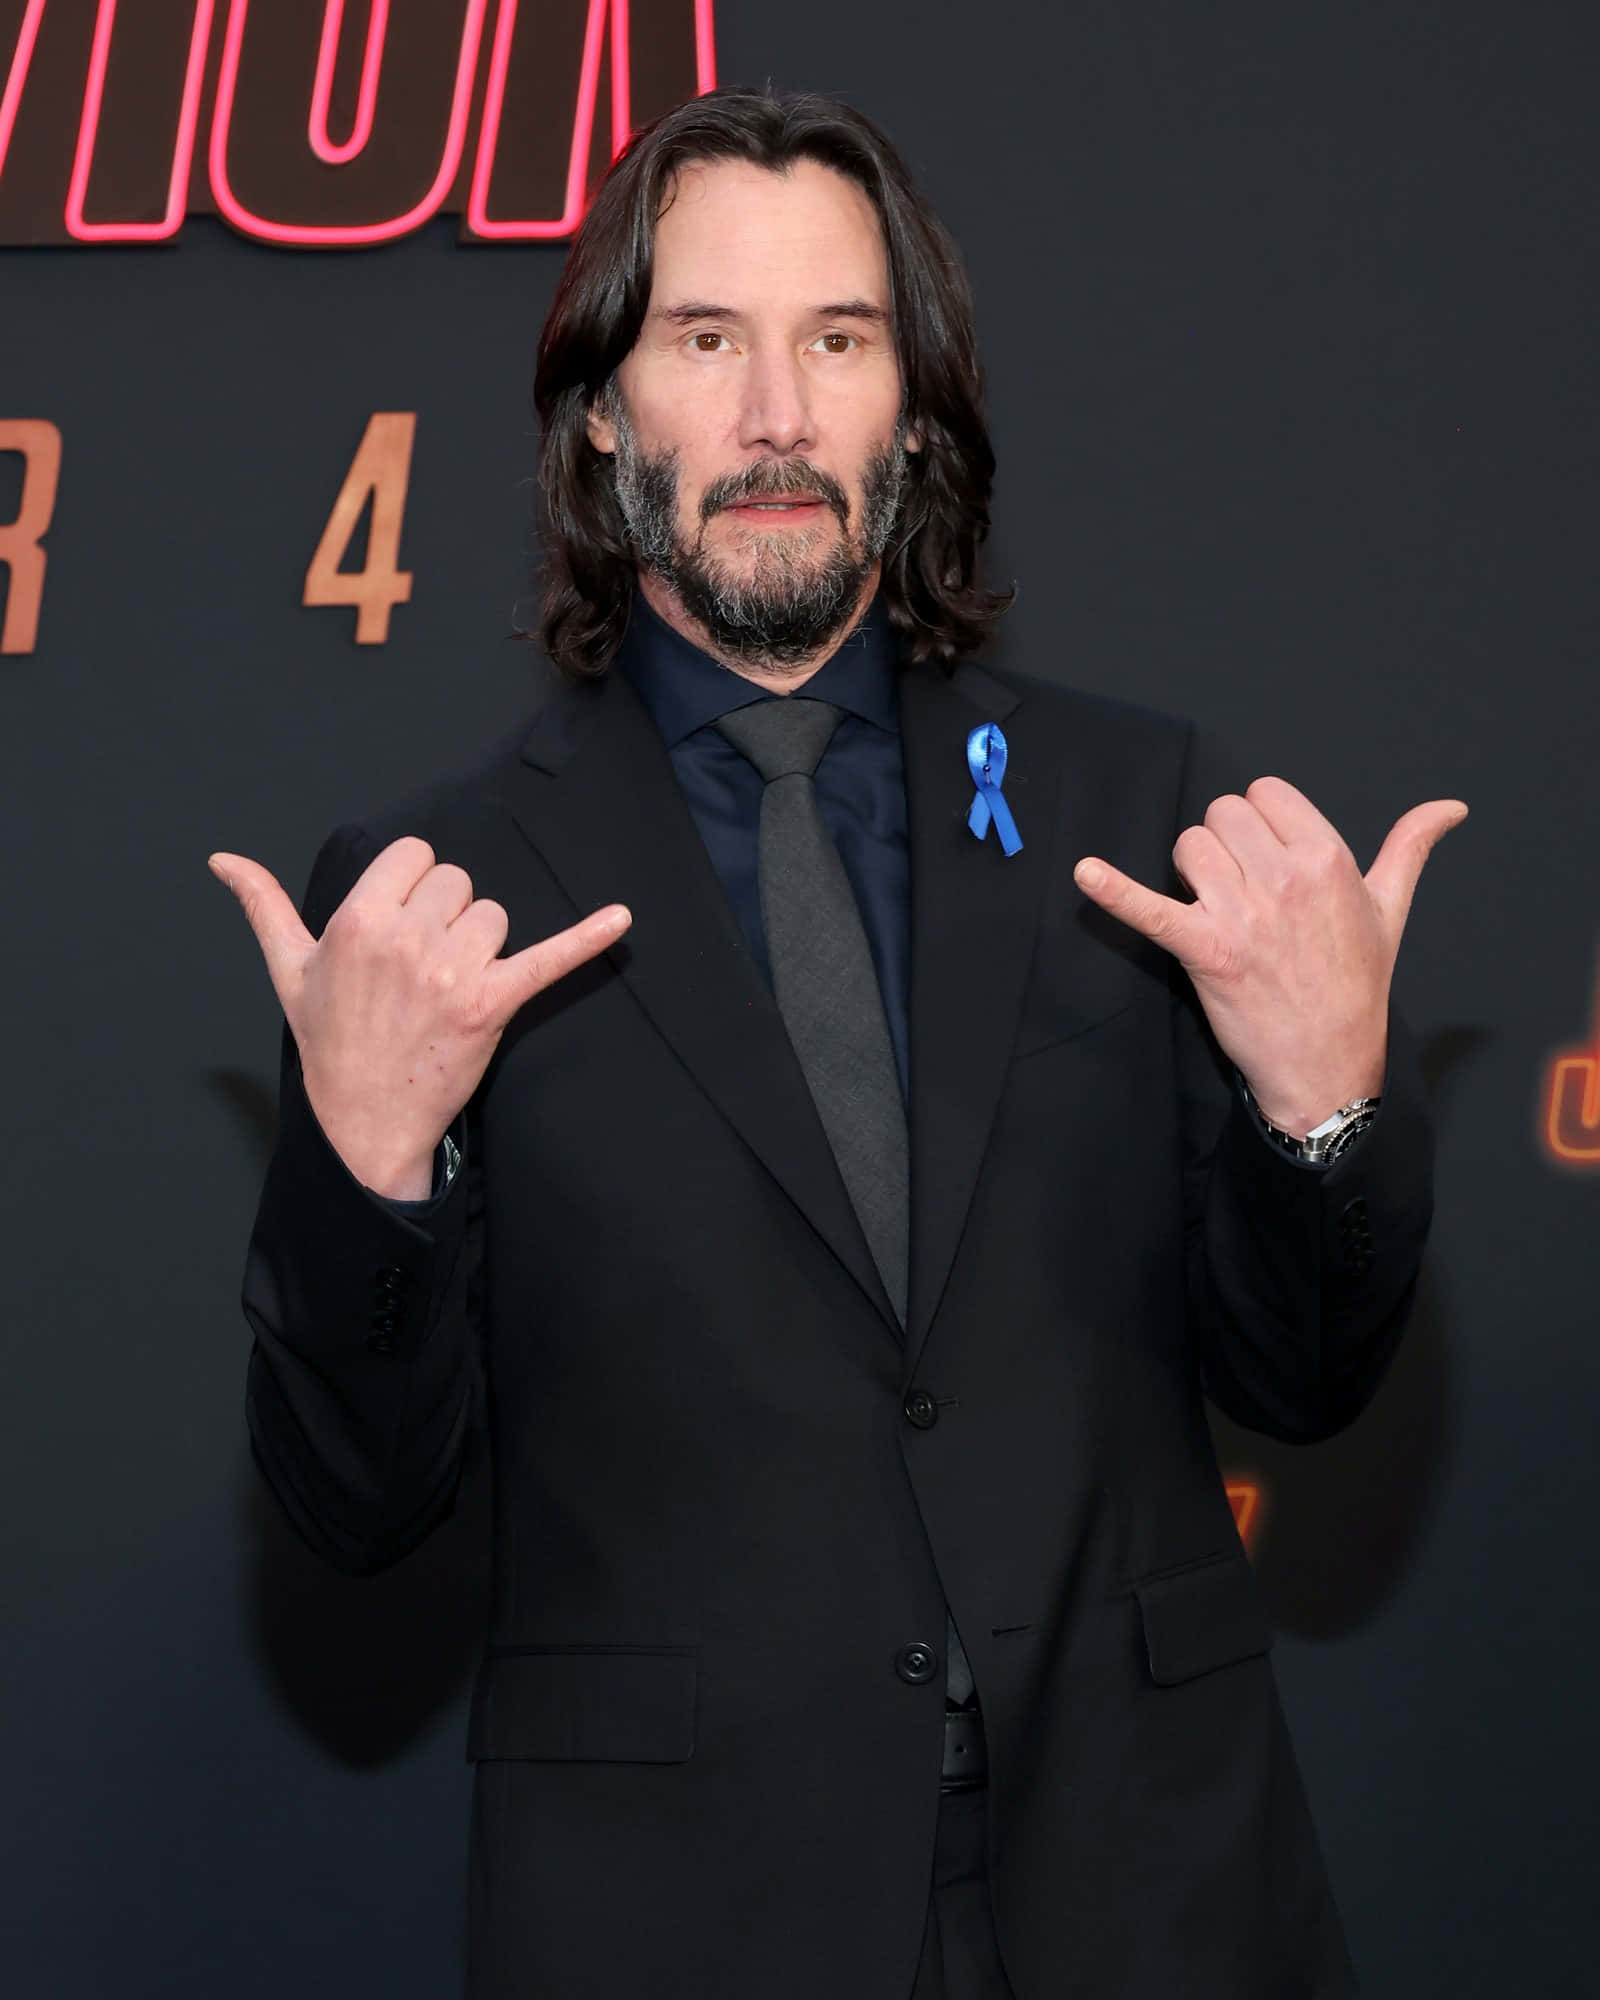 Keanu Reeves striking a pose in a stylish outfit